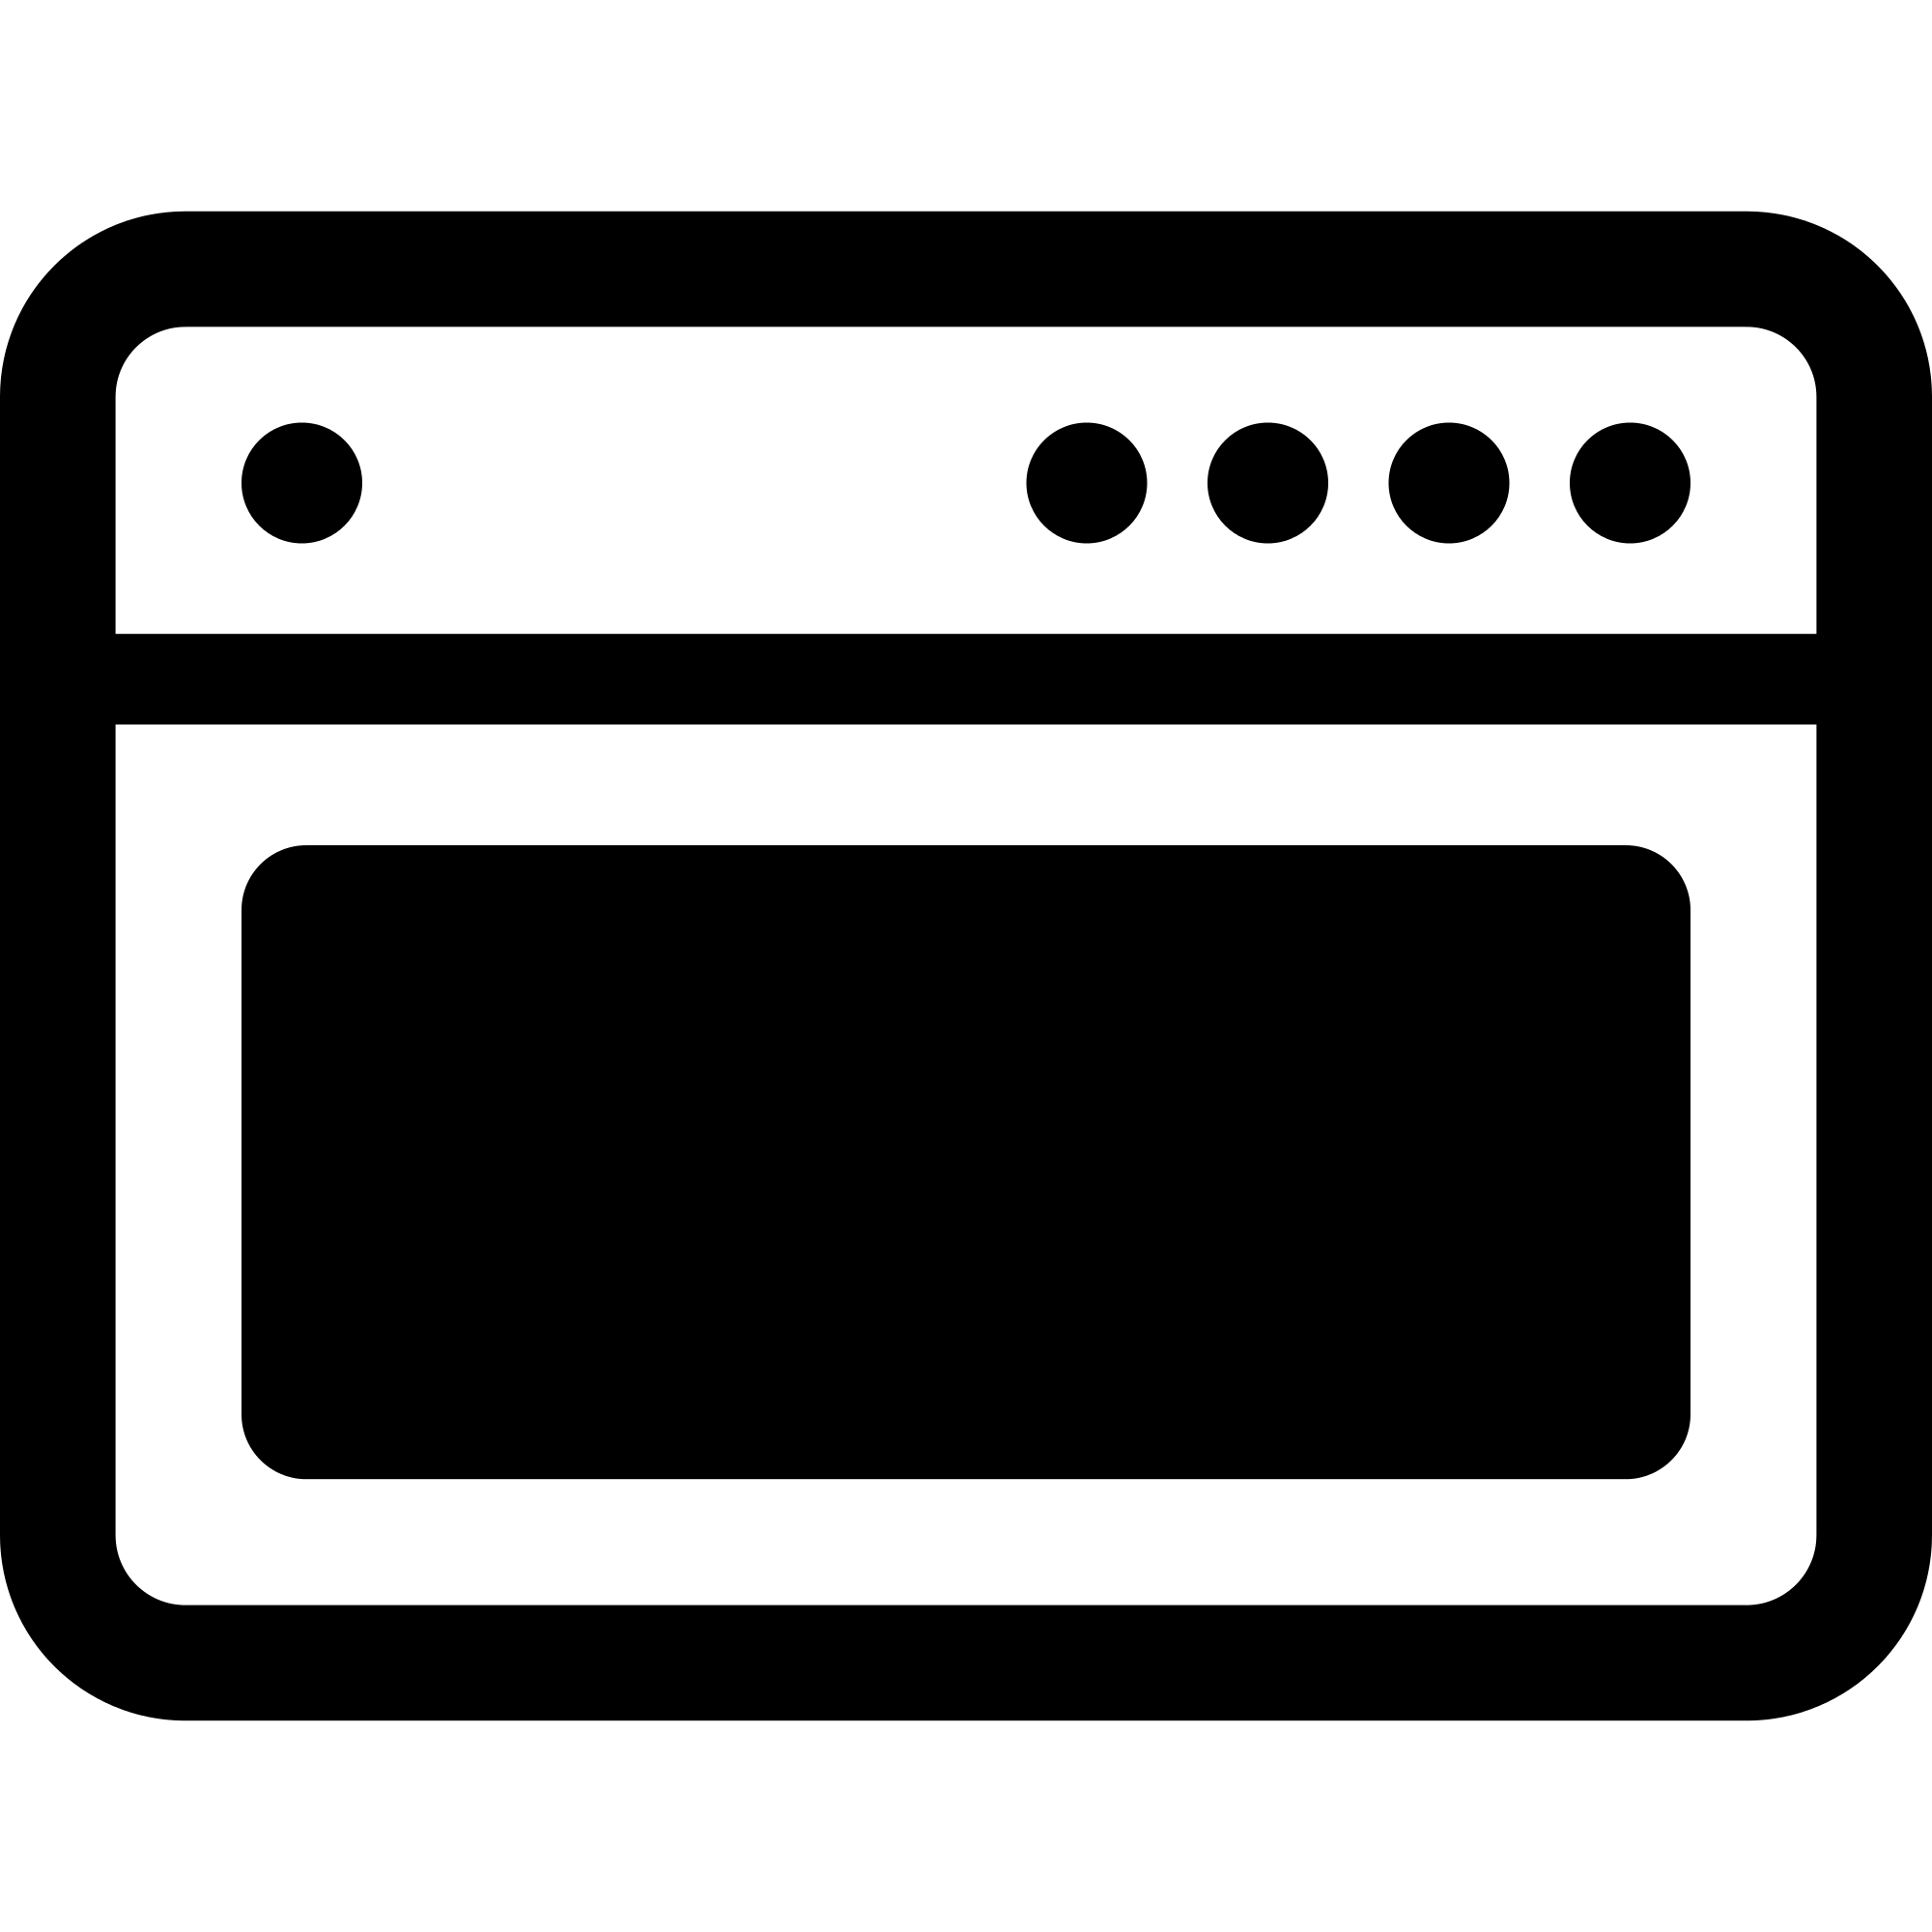 oven clipart svg